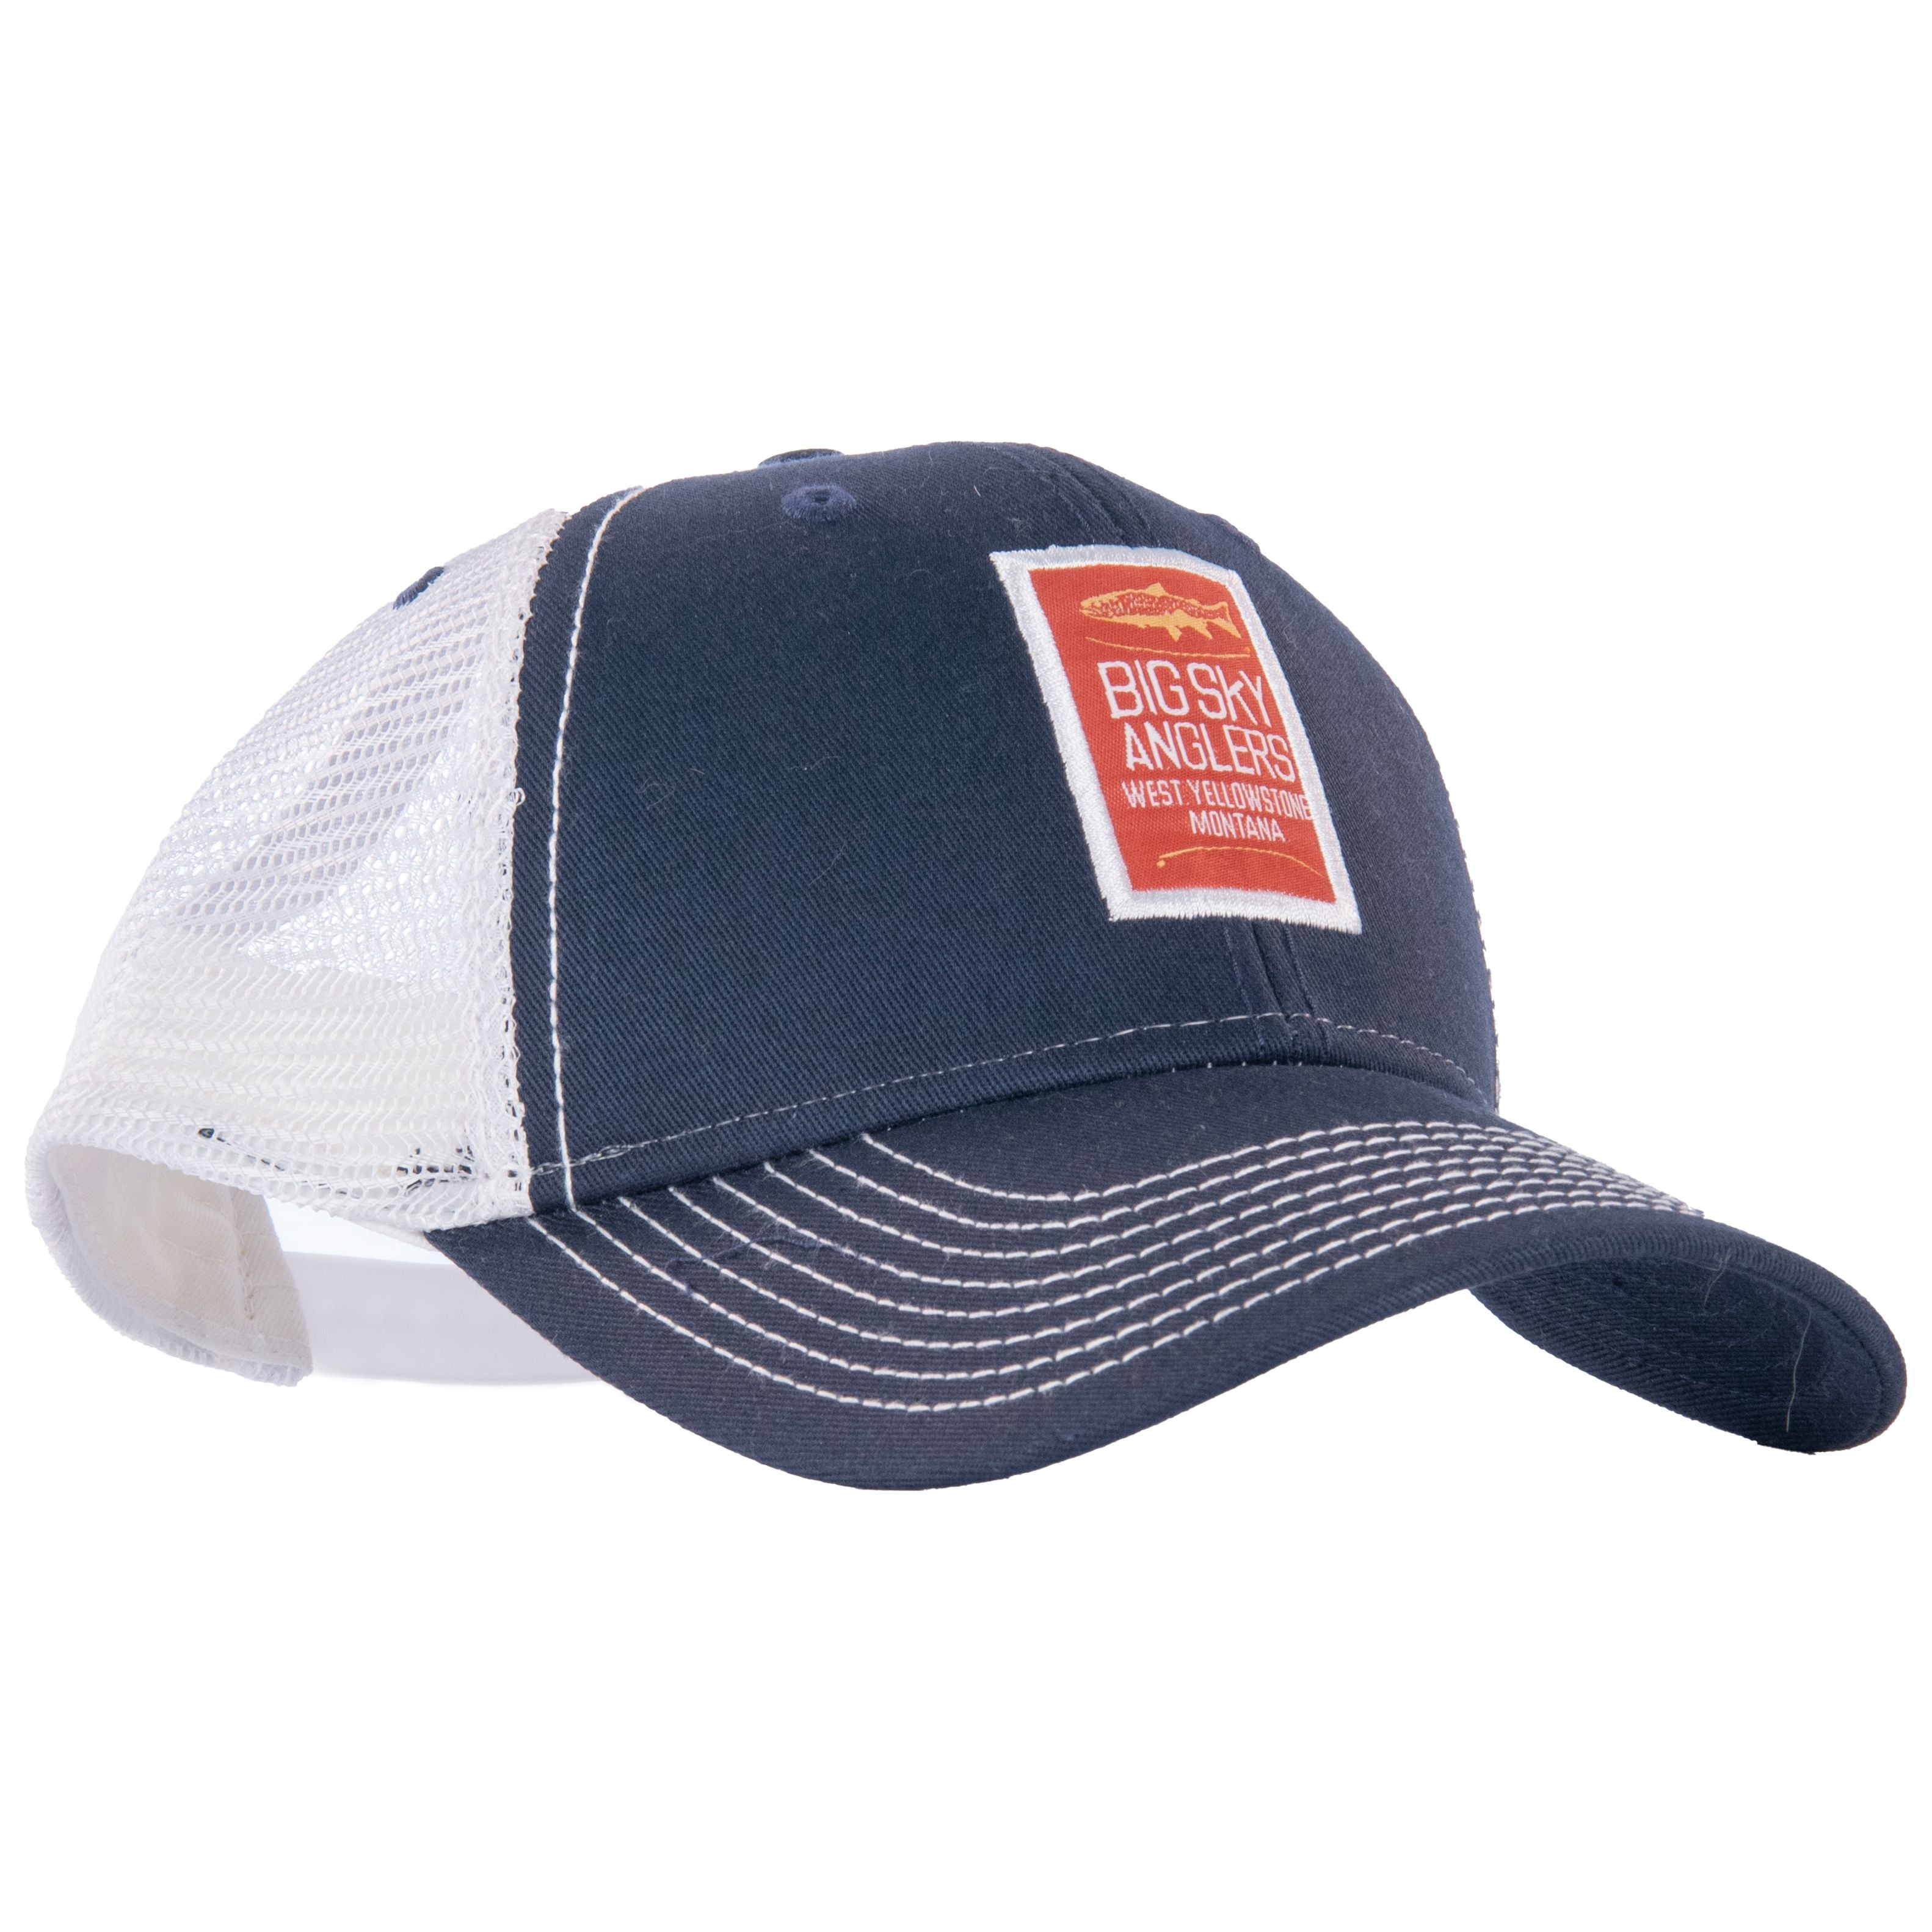 Big Sky Anglers Woven Classic Logo Sideline Cap - Navy/White Default Title Image 01